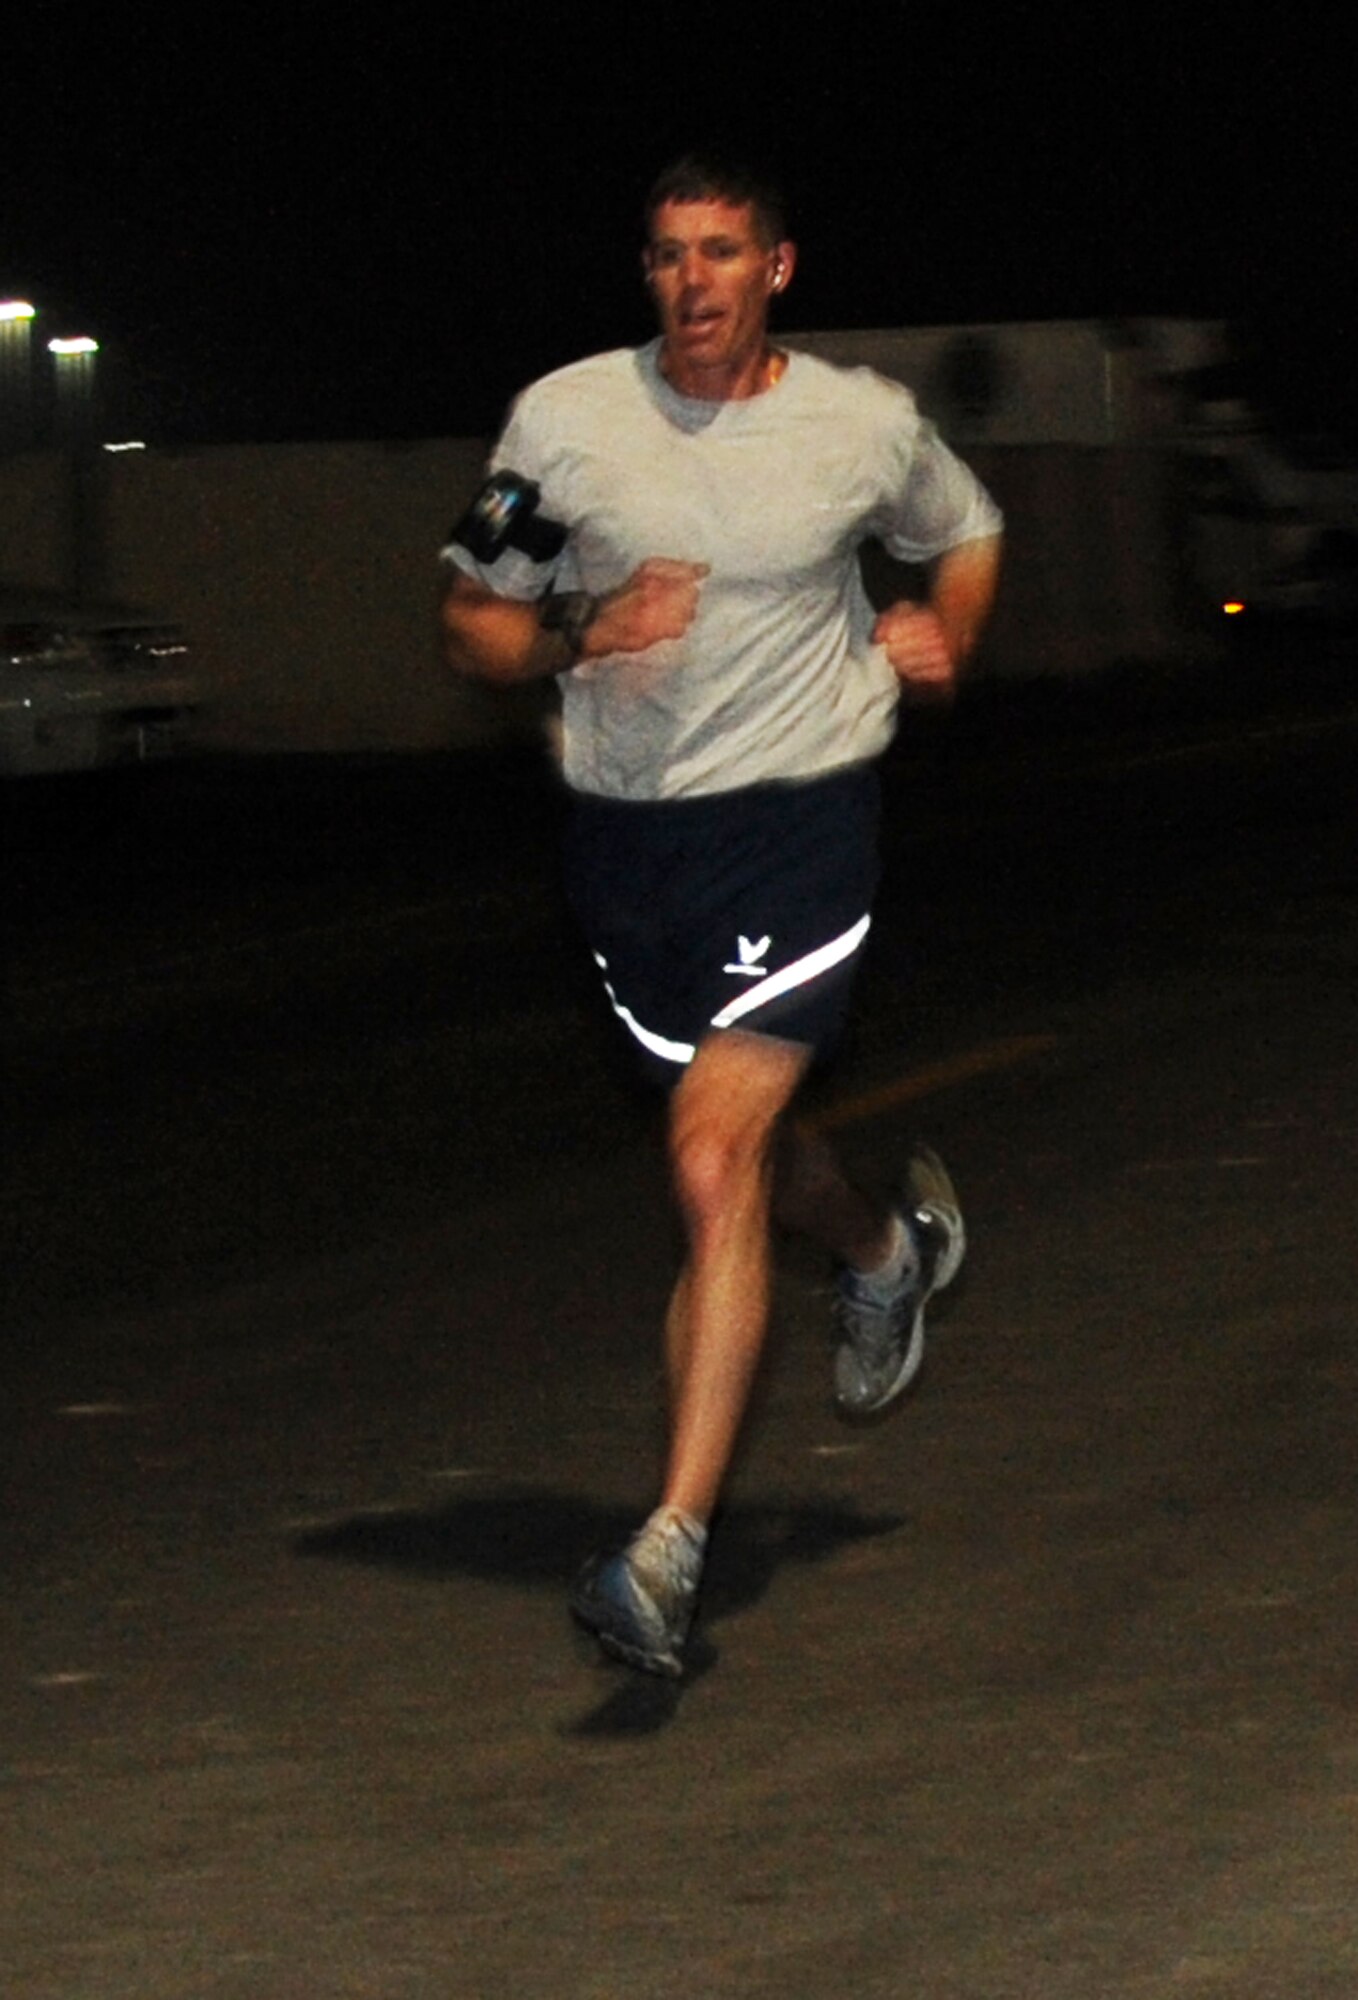 Capt. Michael Small of the 380th Air Expeditionary Wing runs during the Martin Luther King Jr. Day five-kilometer run at a non-disclosed base in Southwest Asia on Jan. 18, 2010.  More than 150 runners participated in the run.  (U.S. Air Force Photo/Senior Airman Jenifer Calhoun/Released)